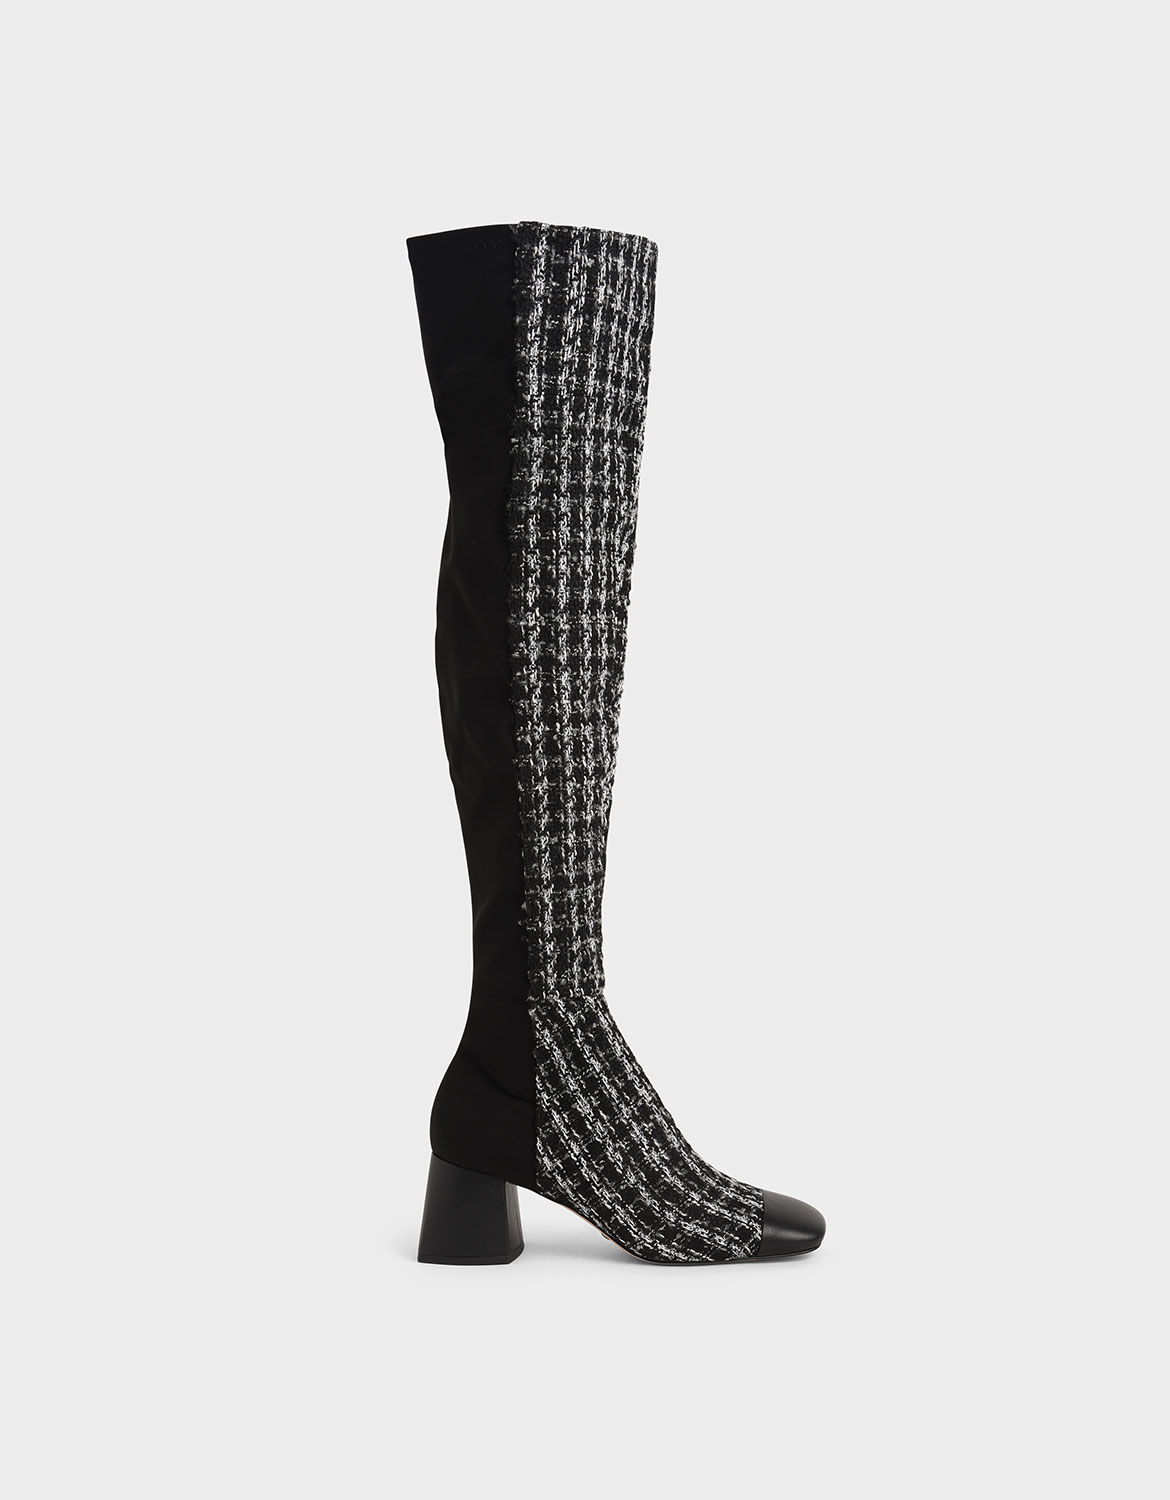 thigh high boots that stay up